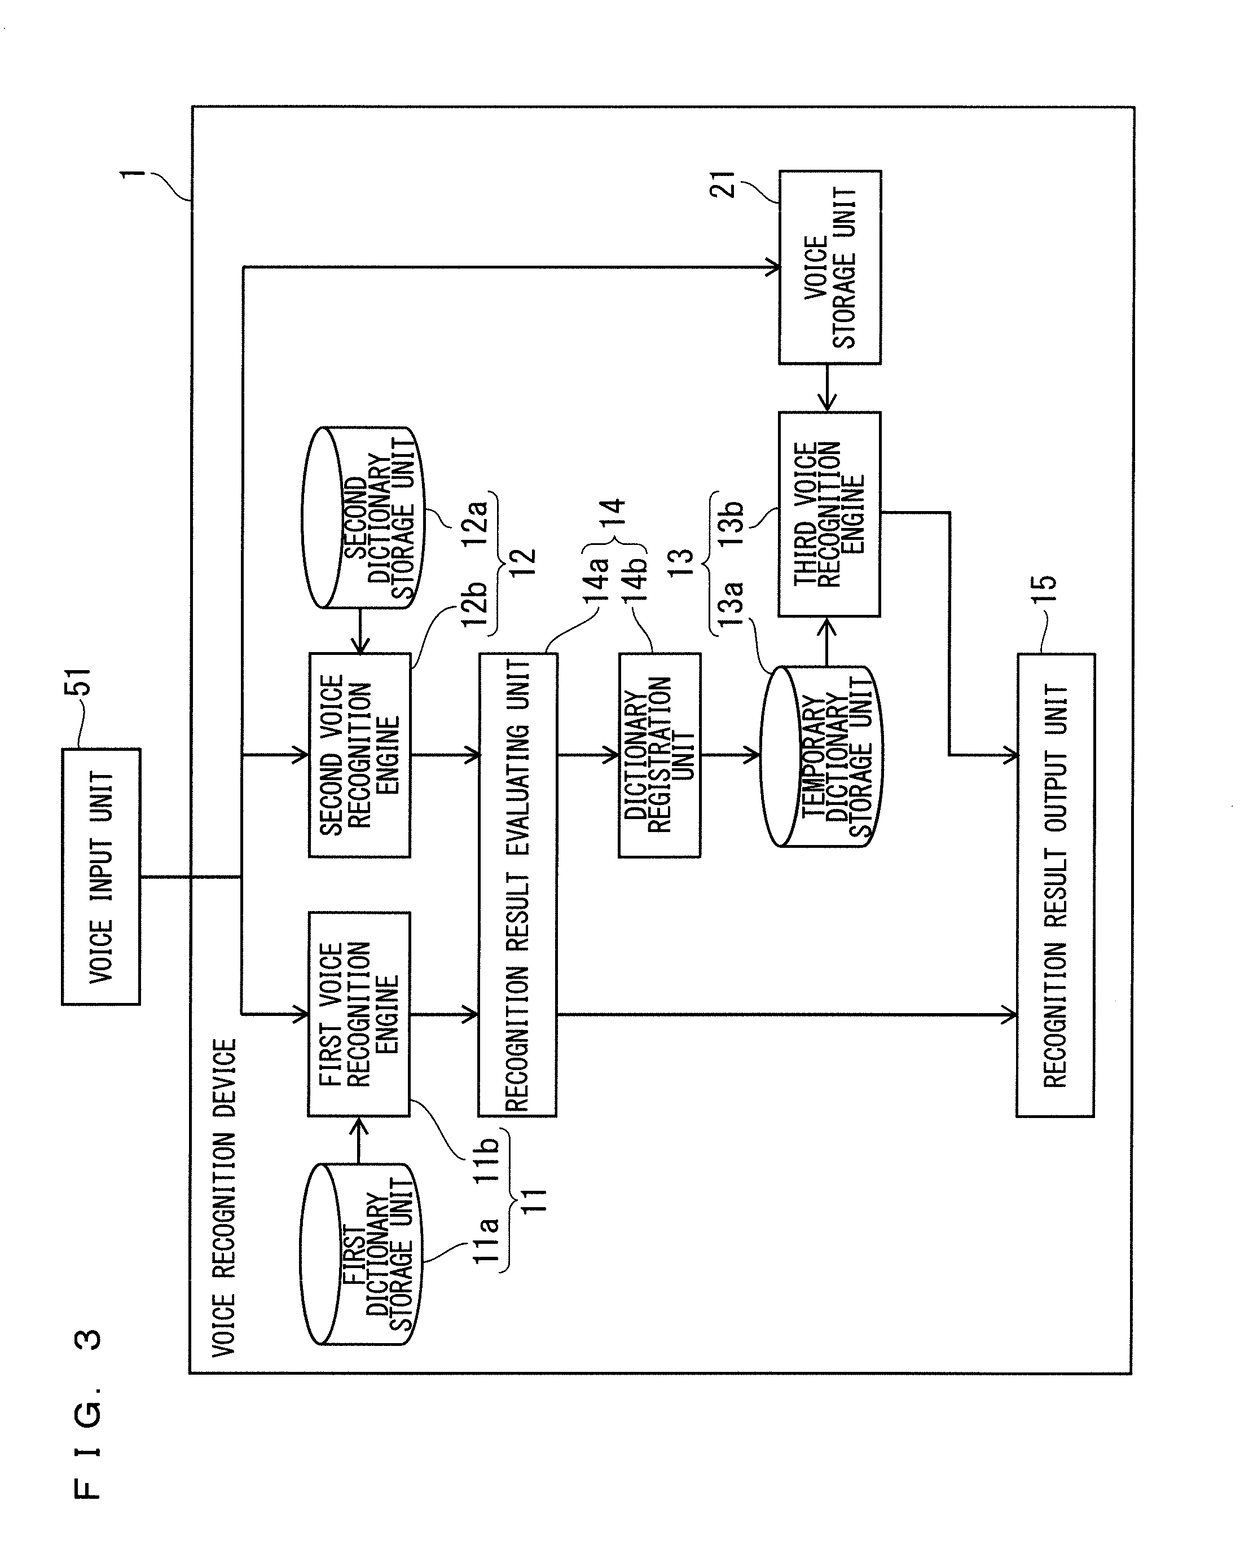 Voice recognition apparatus and voice recognition method